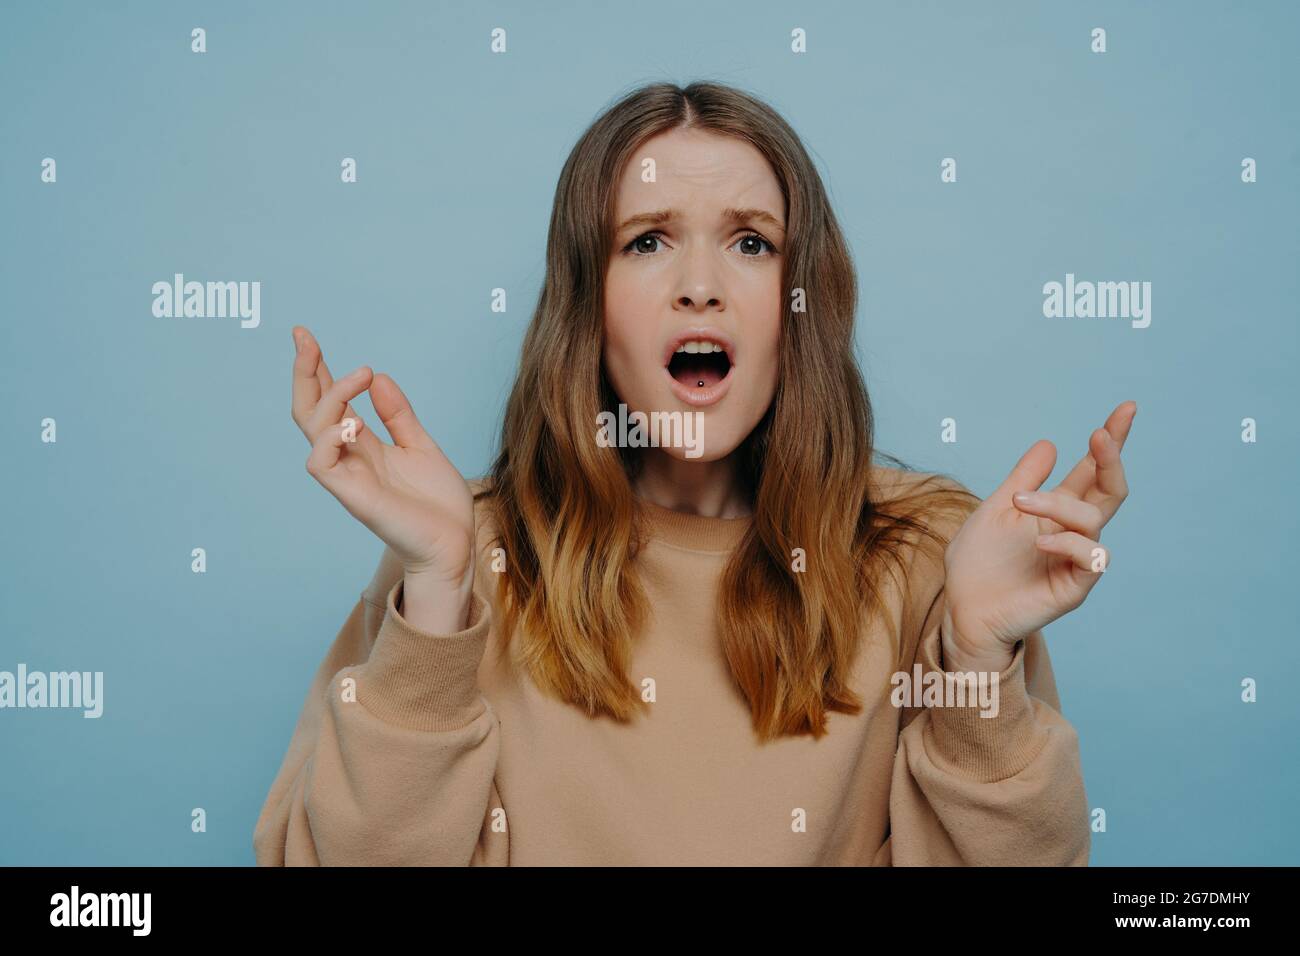 Cute teenage girl expressing disbelief and shock standing against blue studio wall Stock Photo